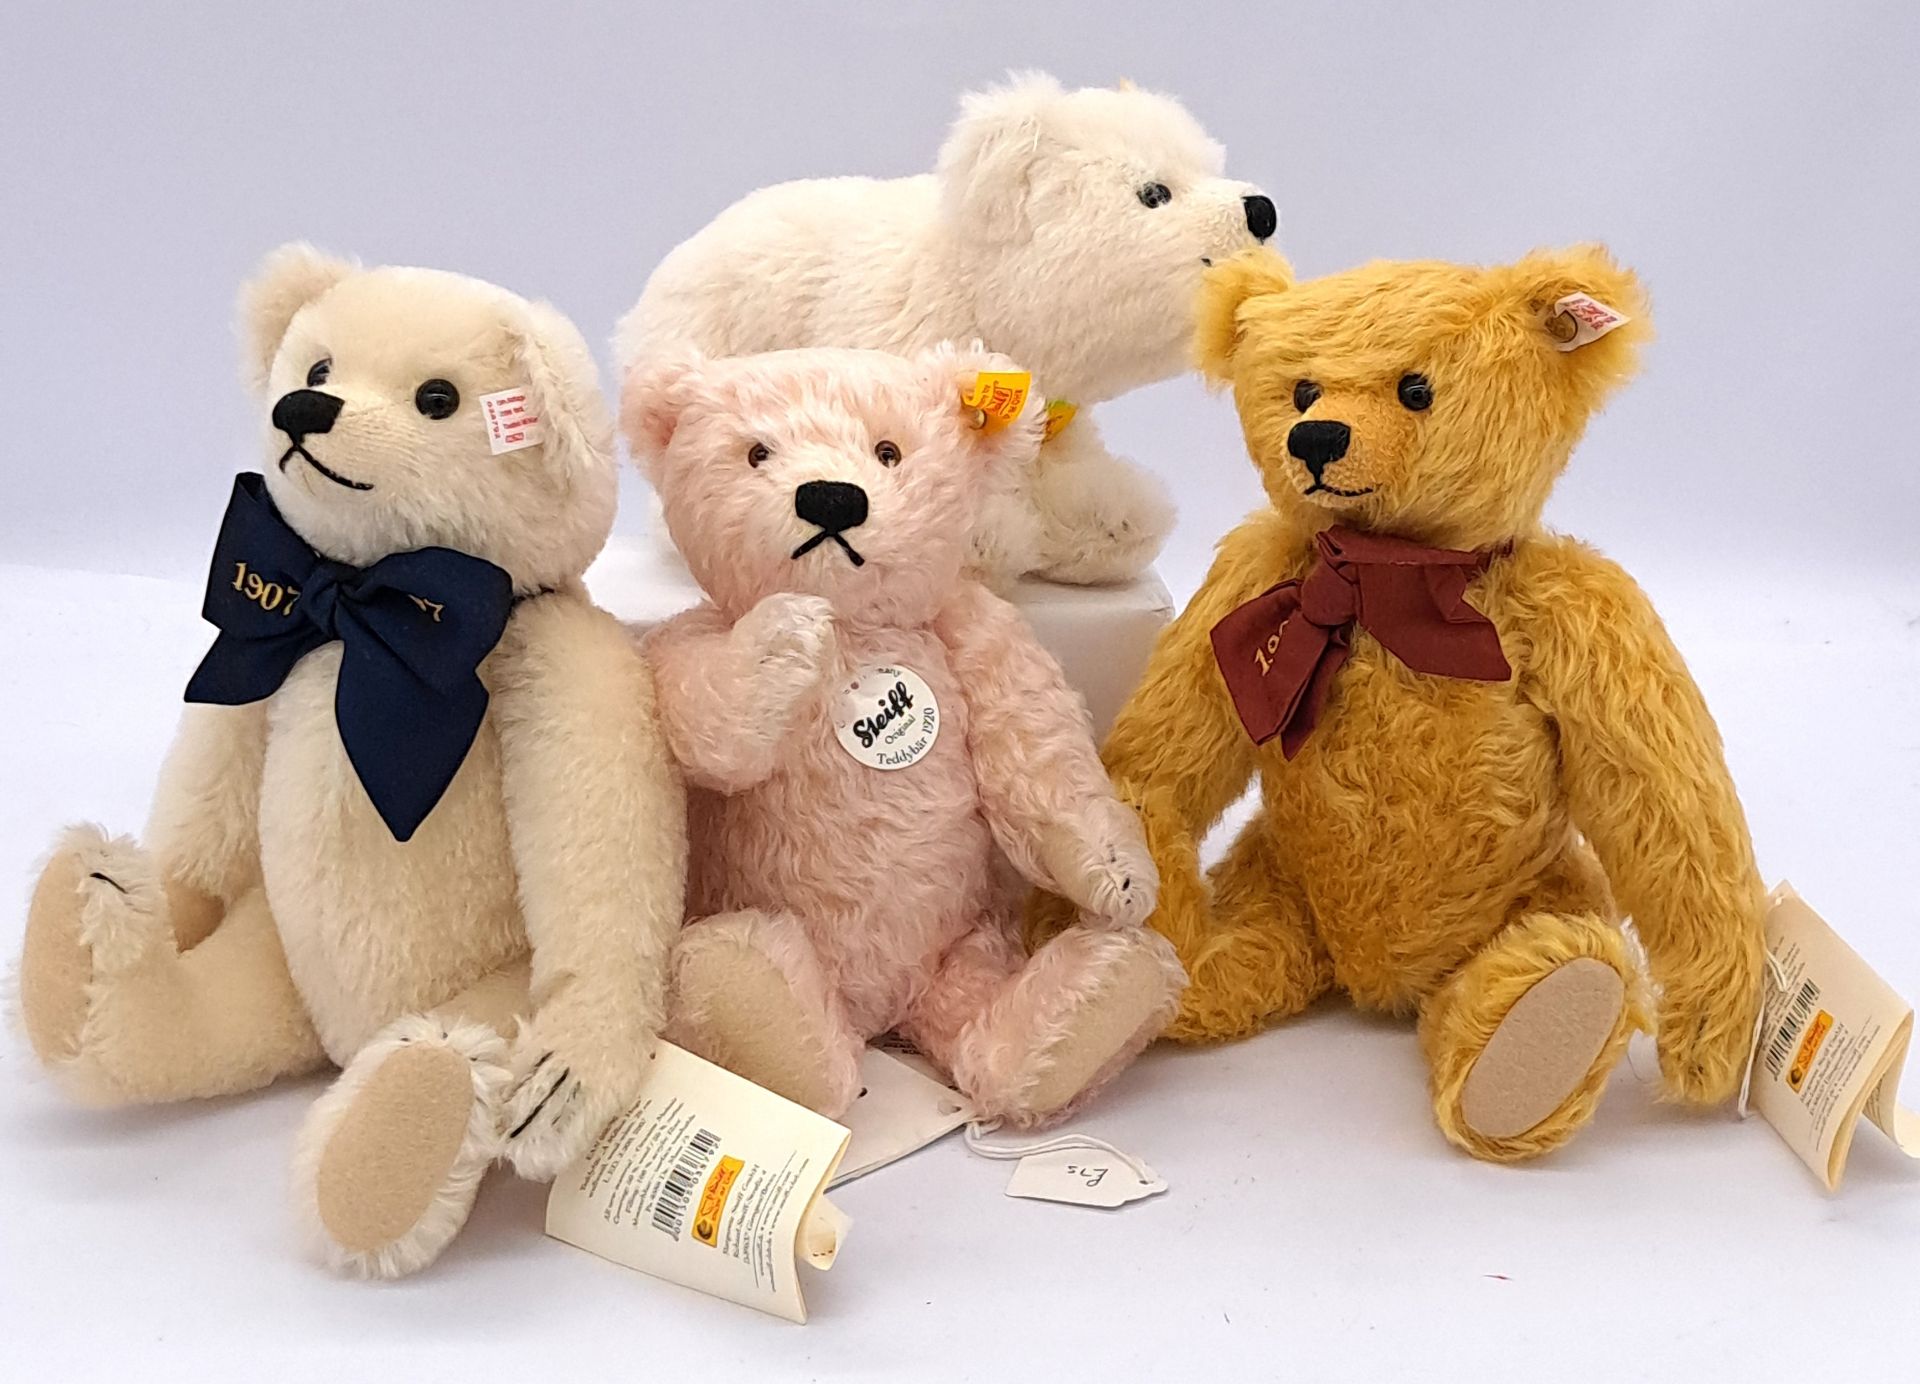 Steiff collection of four limited edition teddy bears